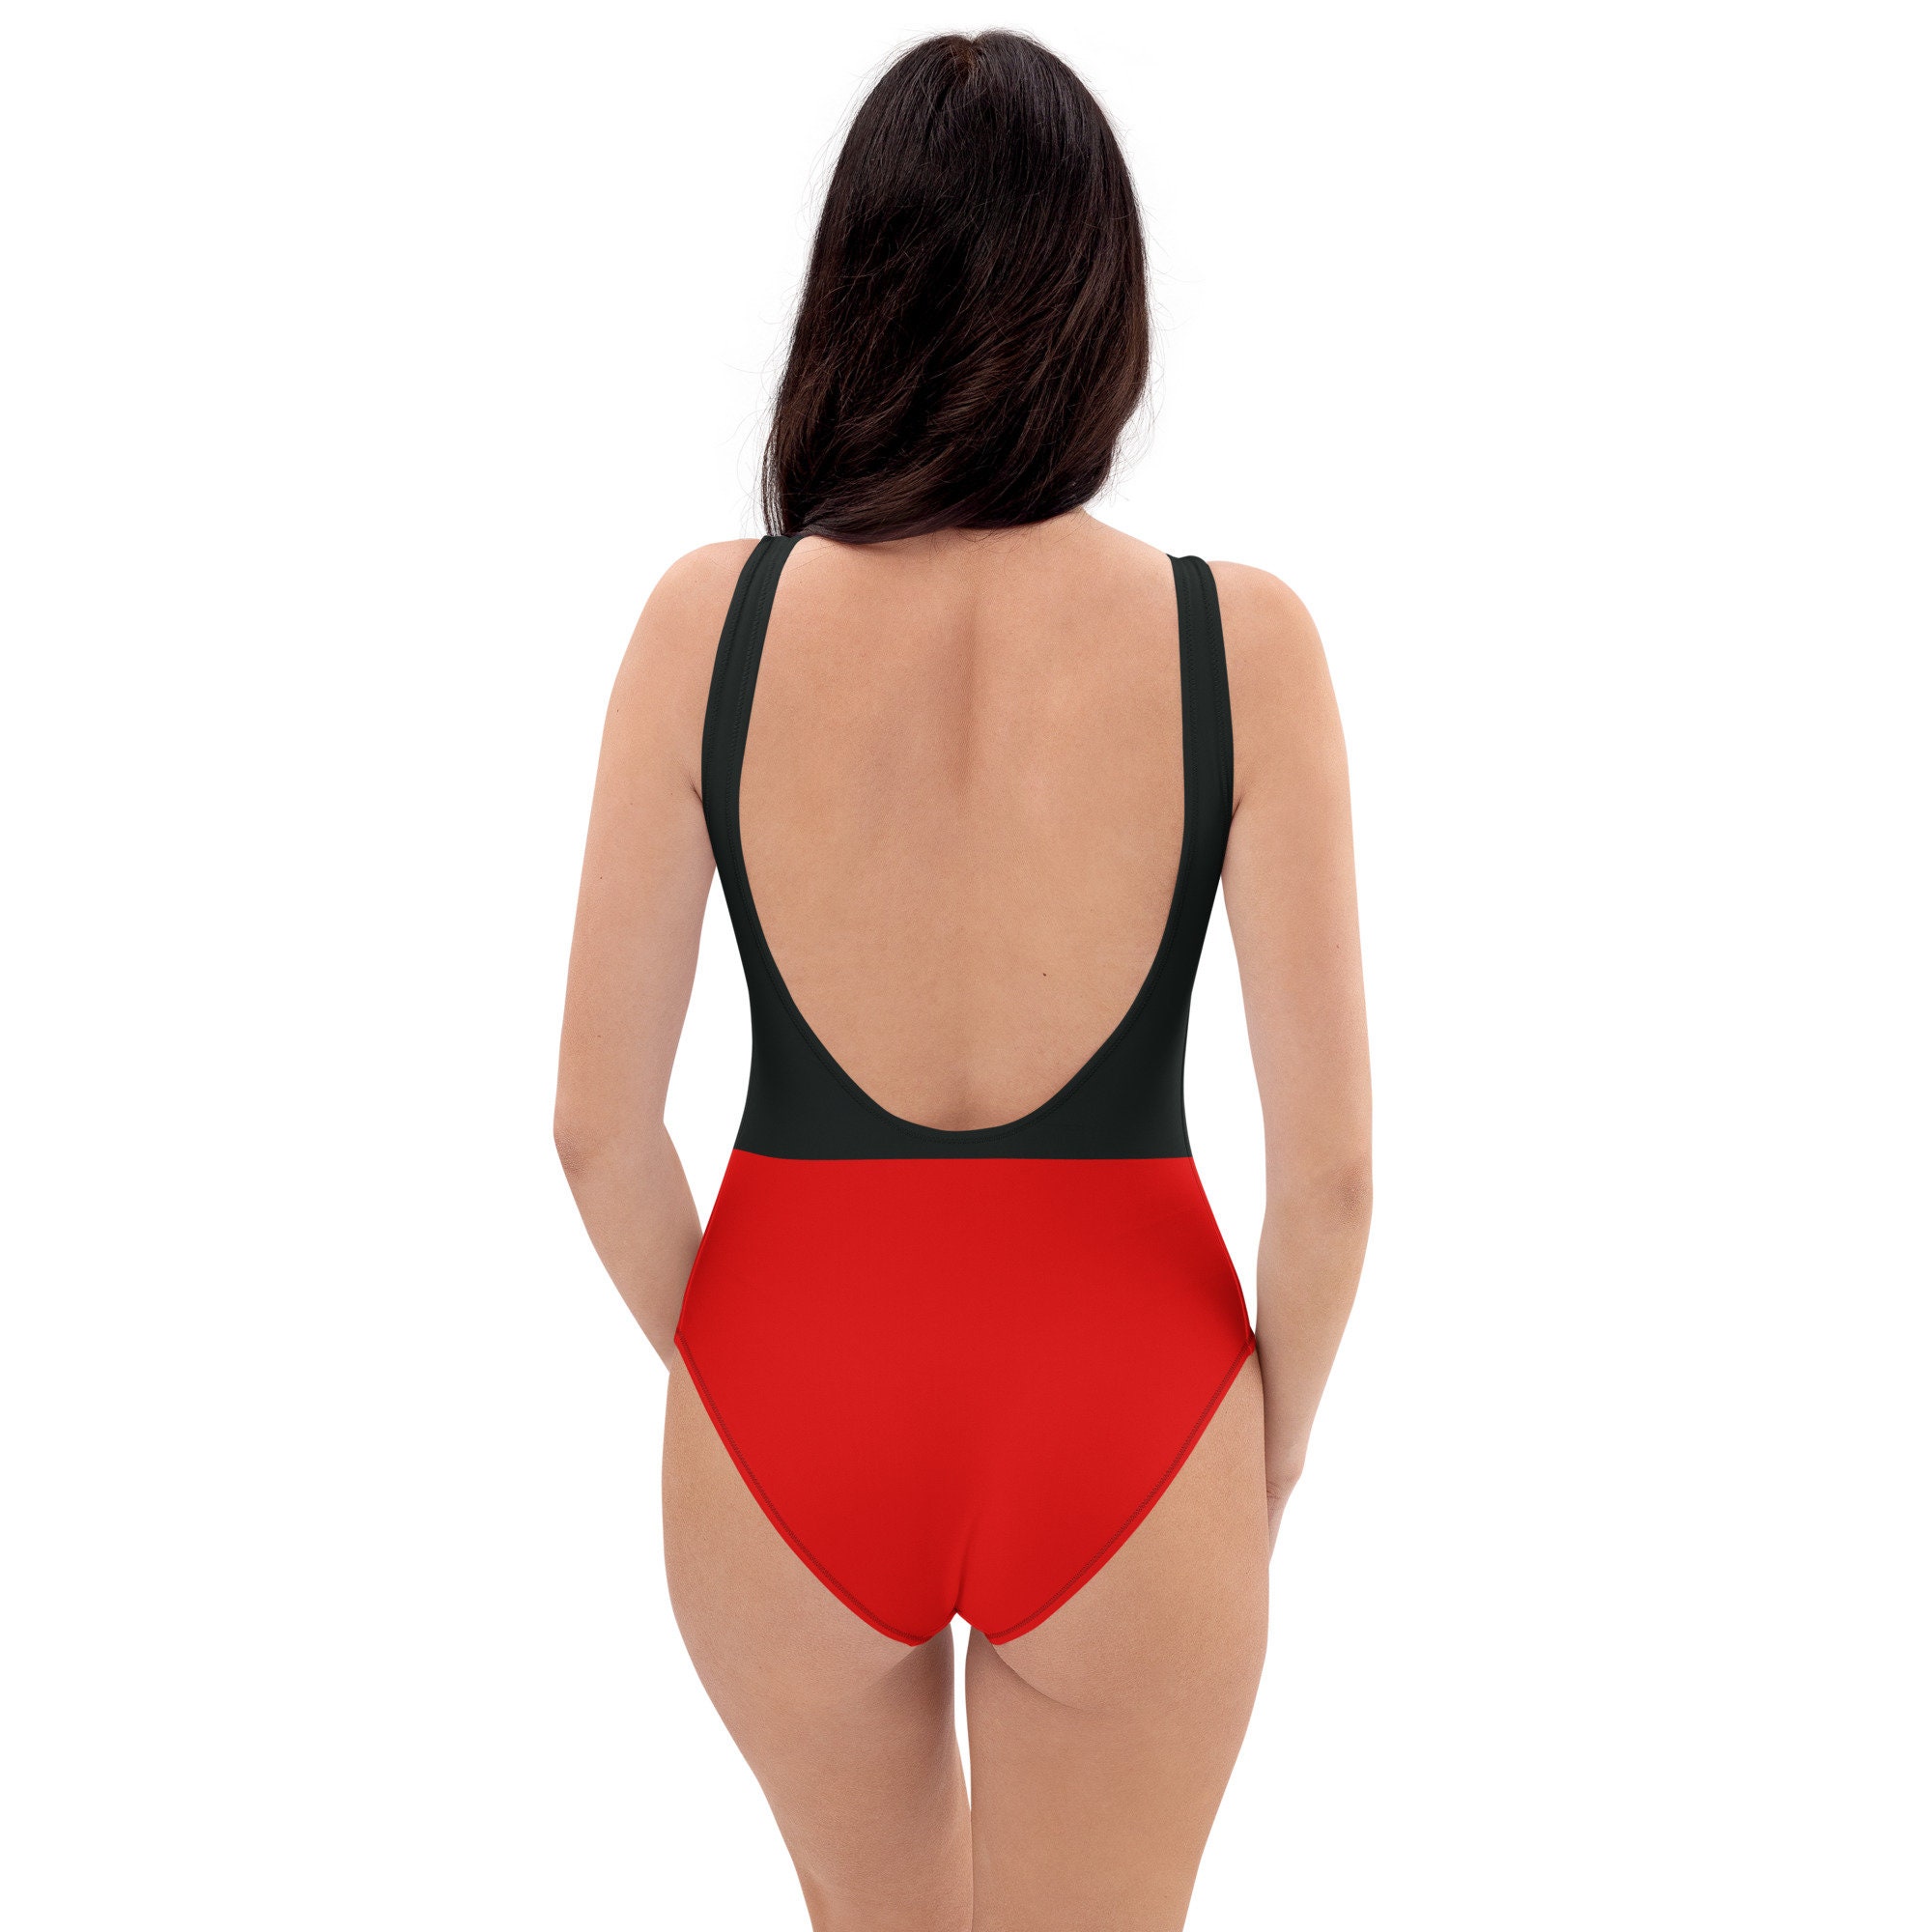 The Mouse One-Piece Swimsuit, Disney Vacation outfit